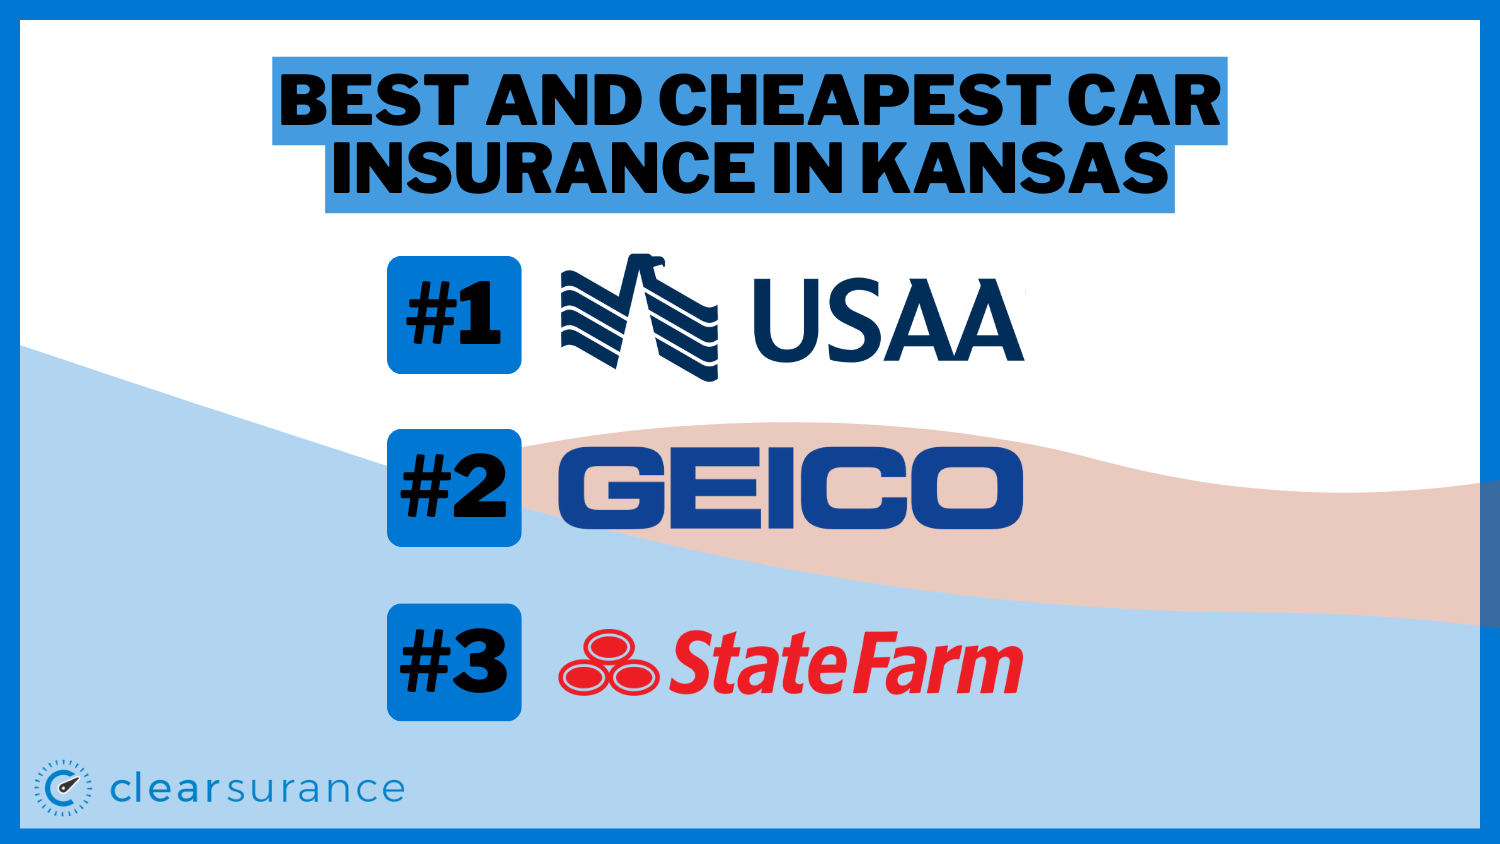 Best and Cheapest Car Insurance in Kansas: USAA, Geico, State Farm